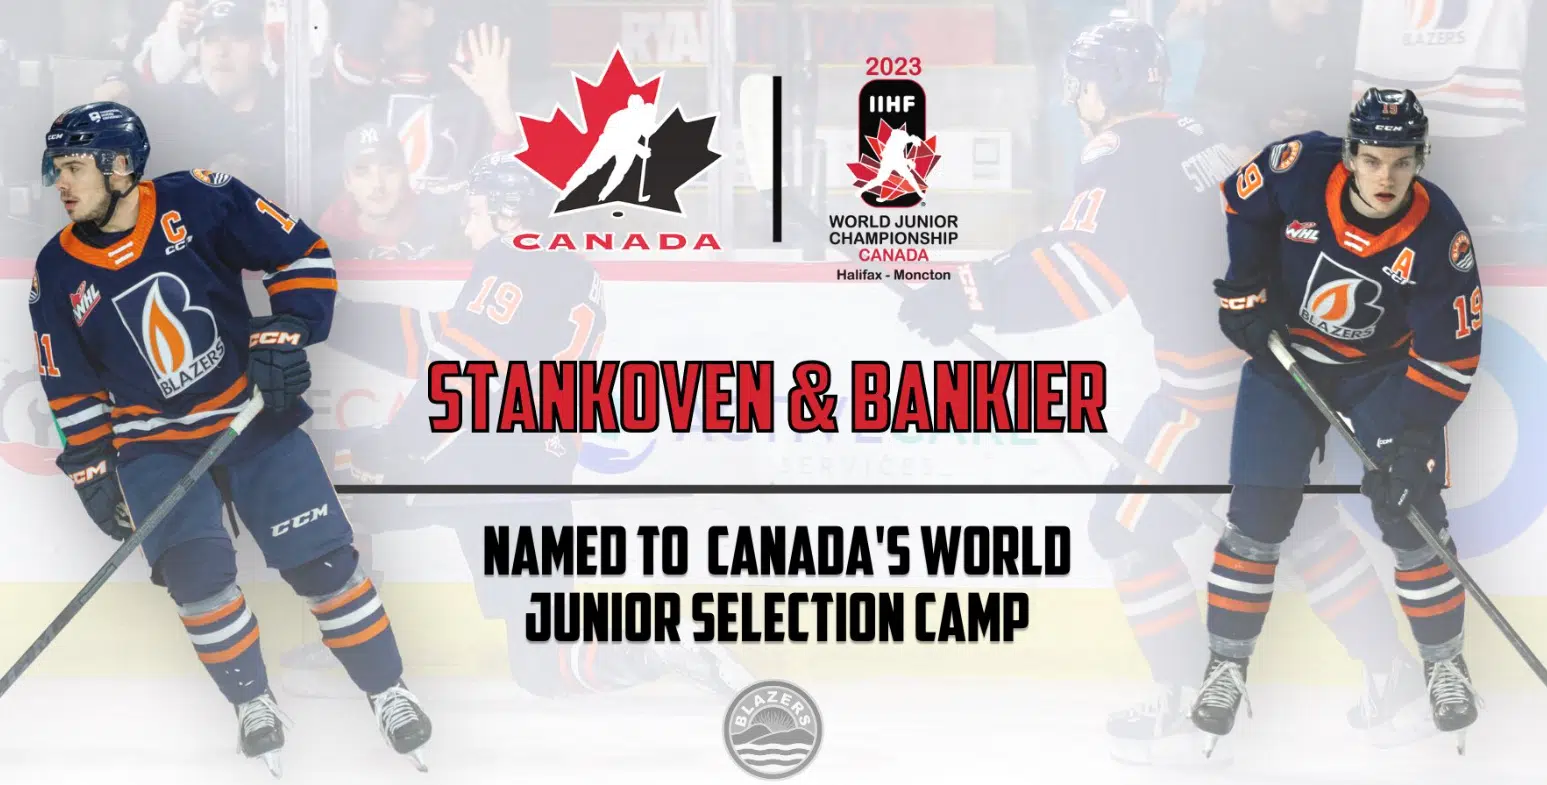 Blazers' Stankoven and Bankier heading to 2023 World Juniors selection camp